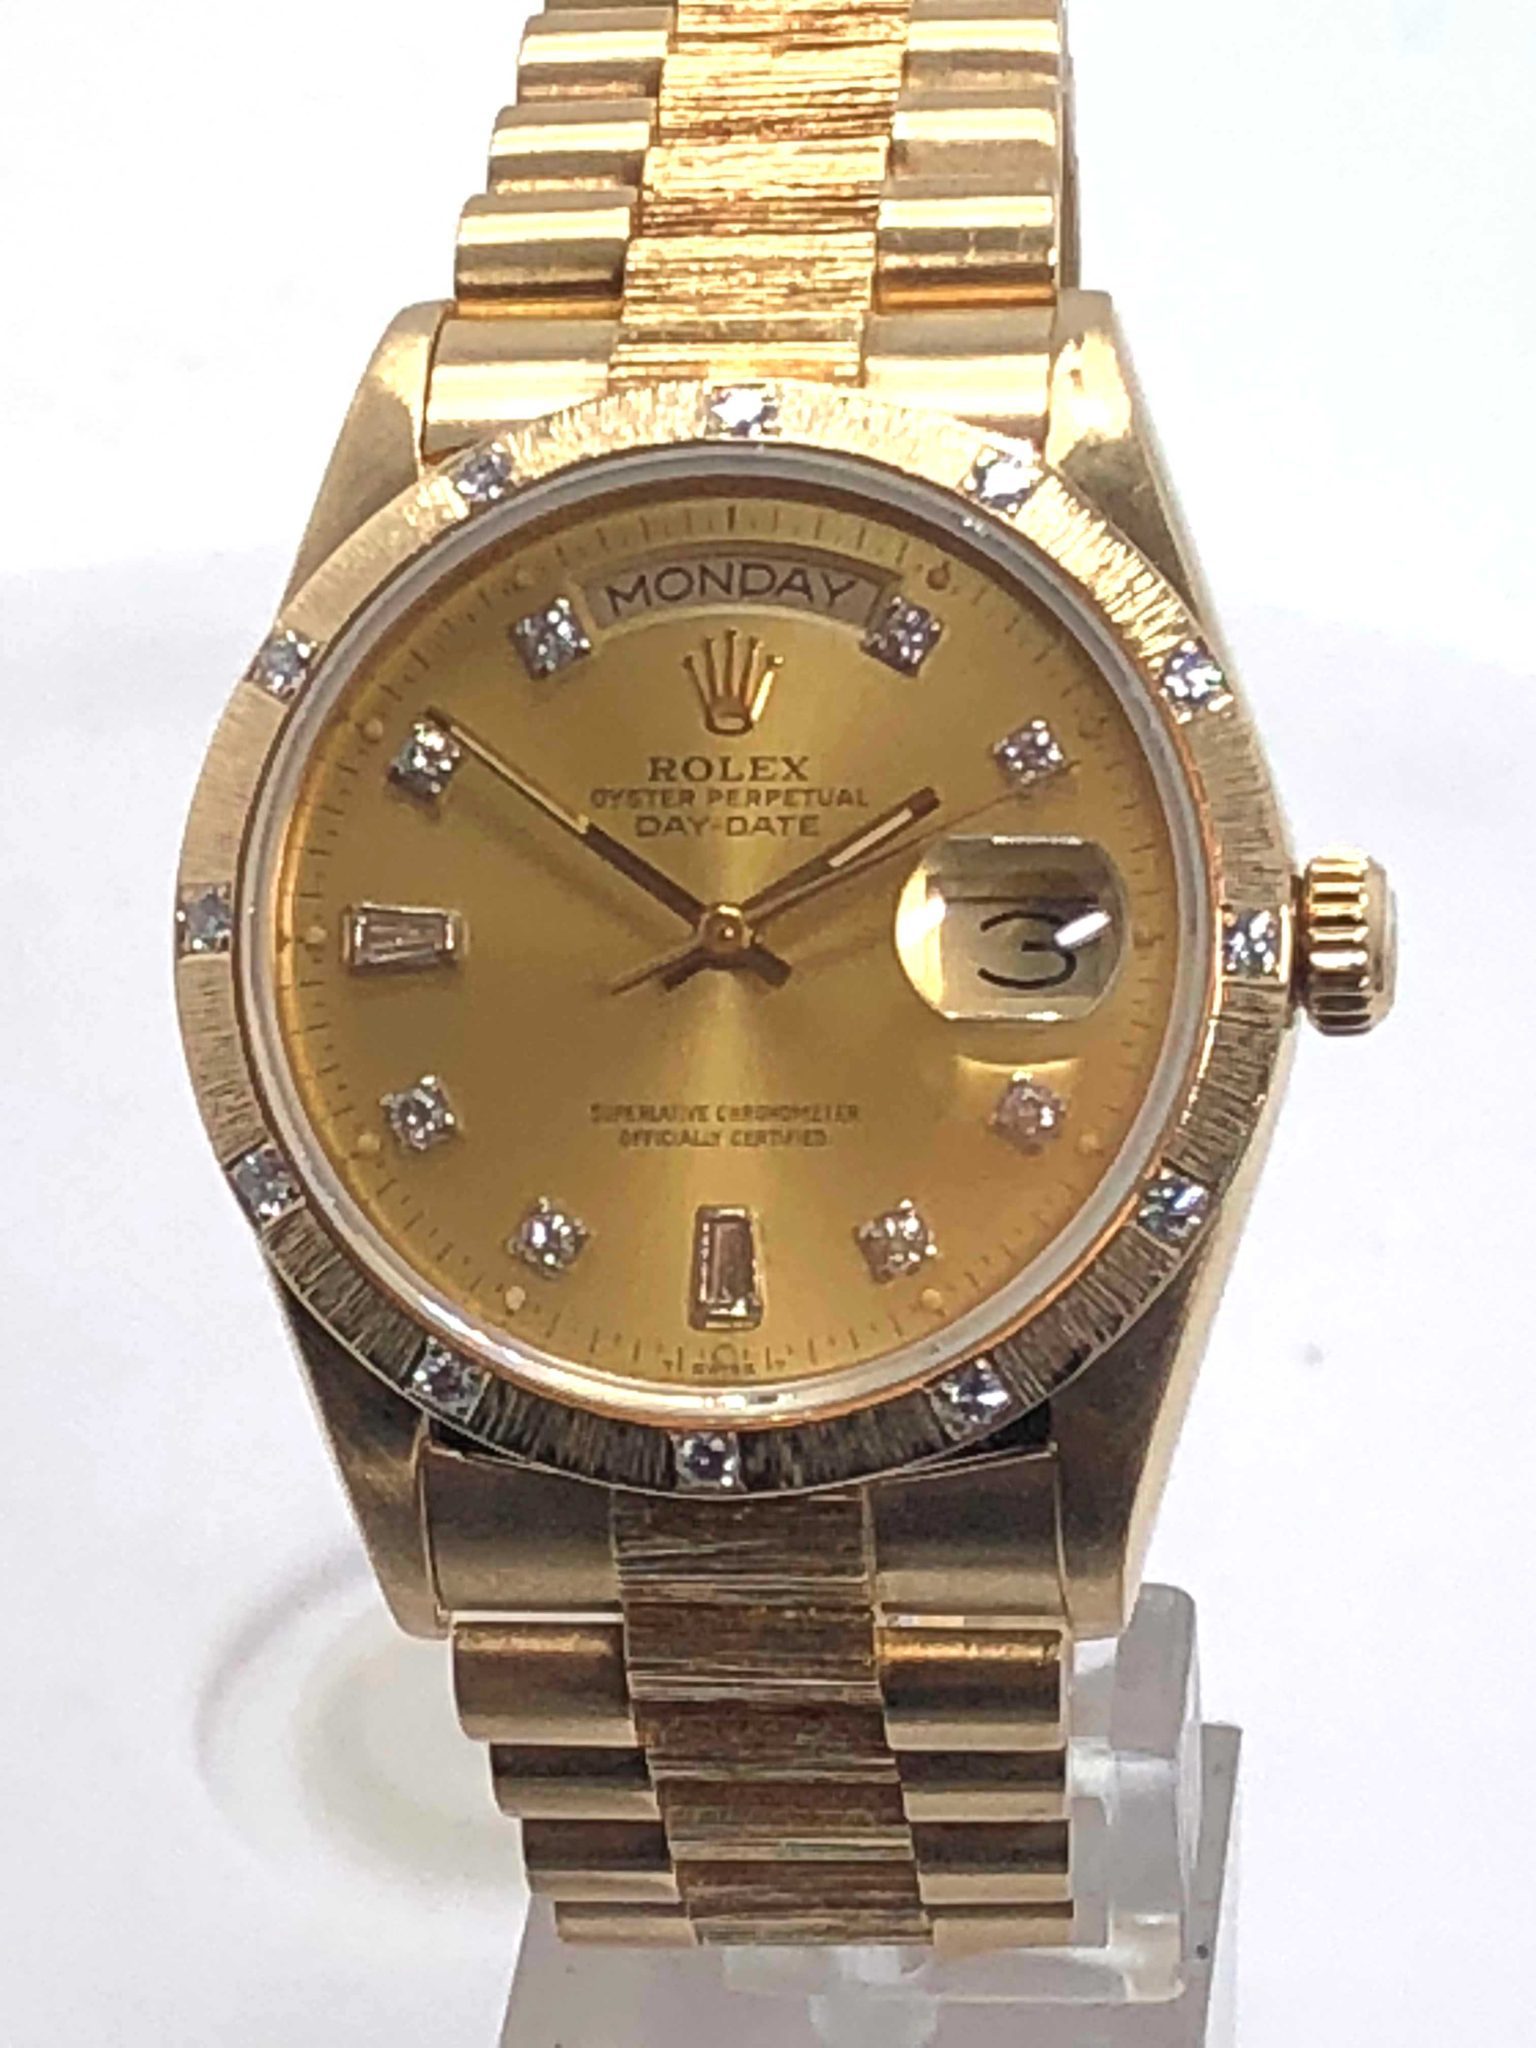 Rolex Oyster Perpetual Day-Date MODEL # 18108